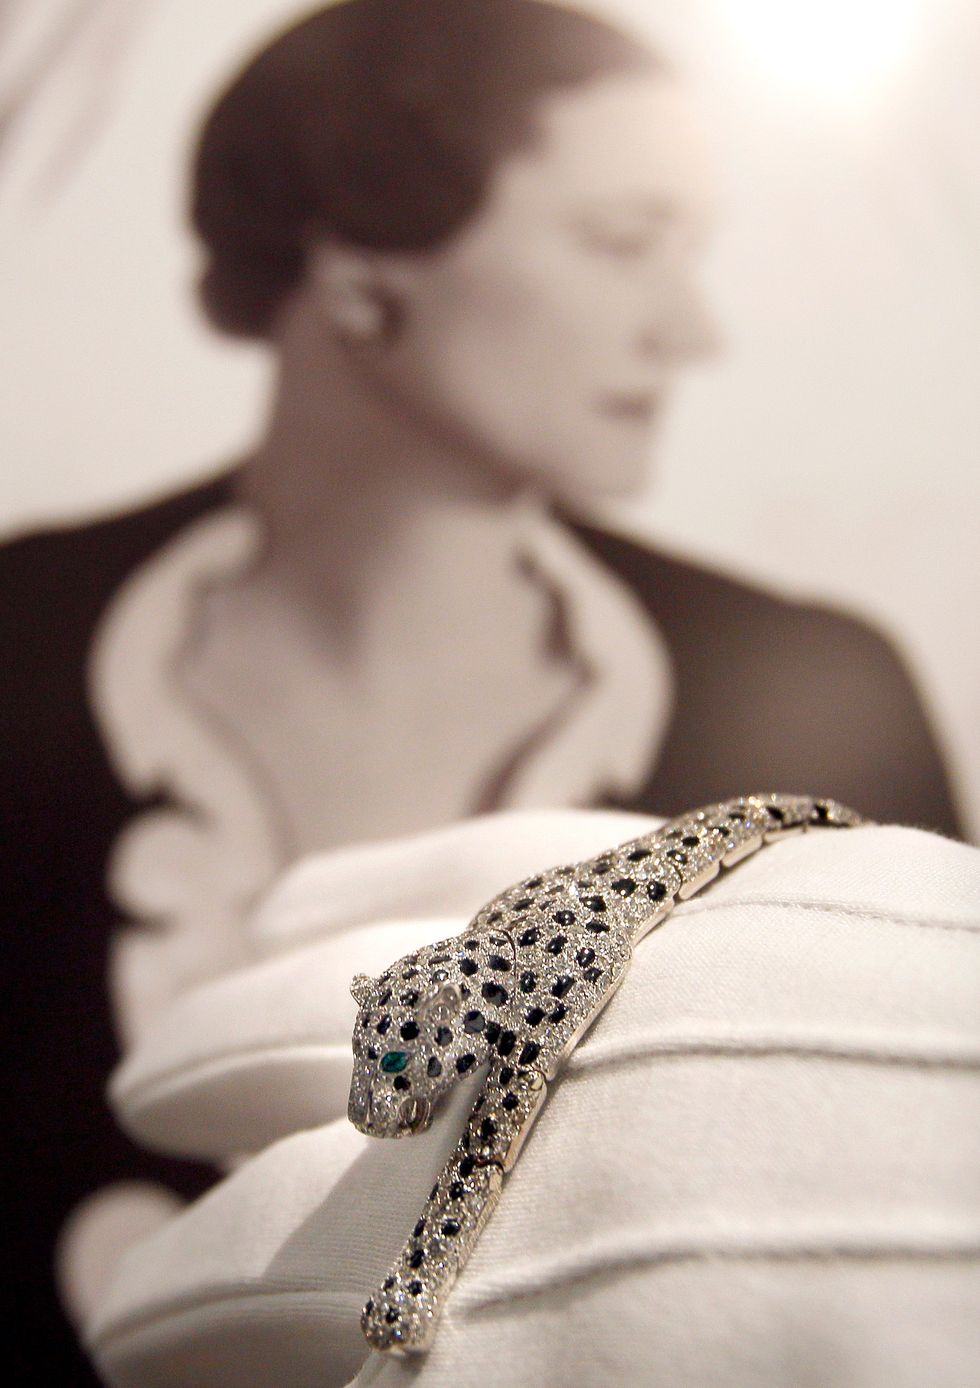 An onyx and diamond panthère bracelet seen displayed in front of a cecil beaton portrait of wallis simpson at sotheby’s auction rooms in london.